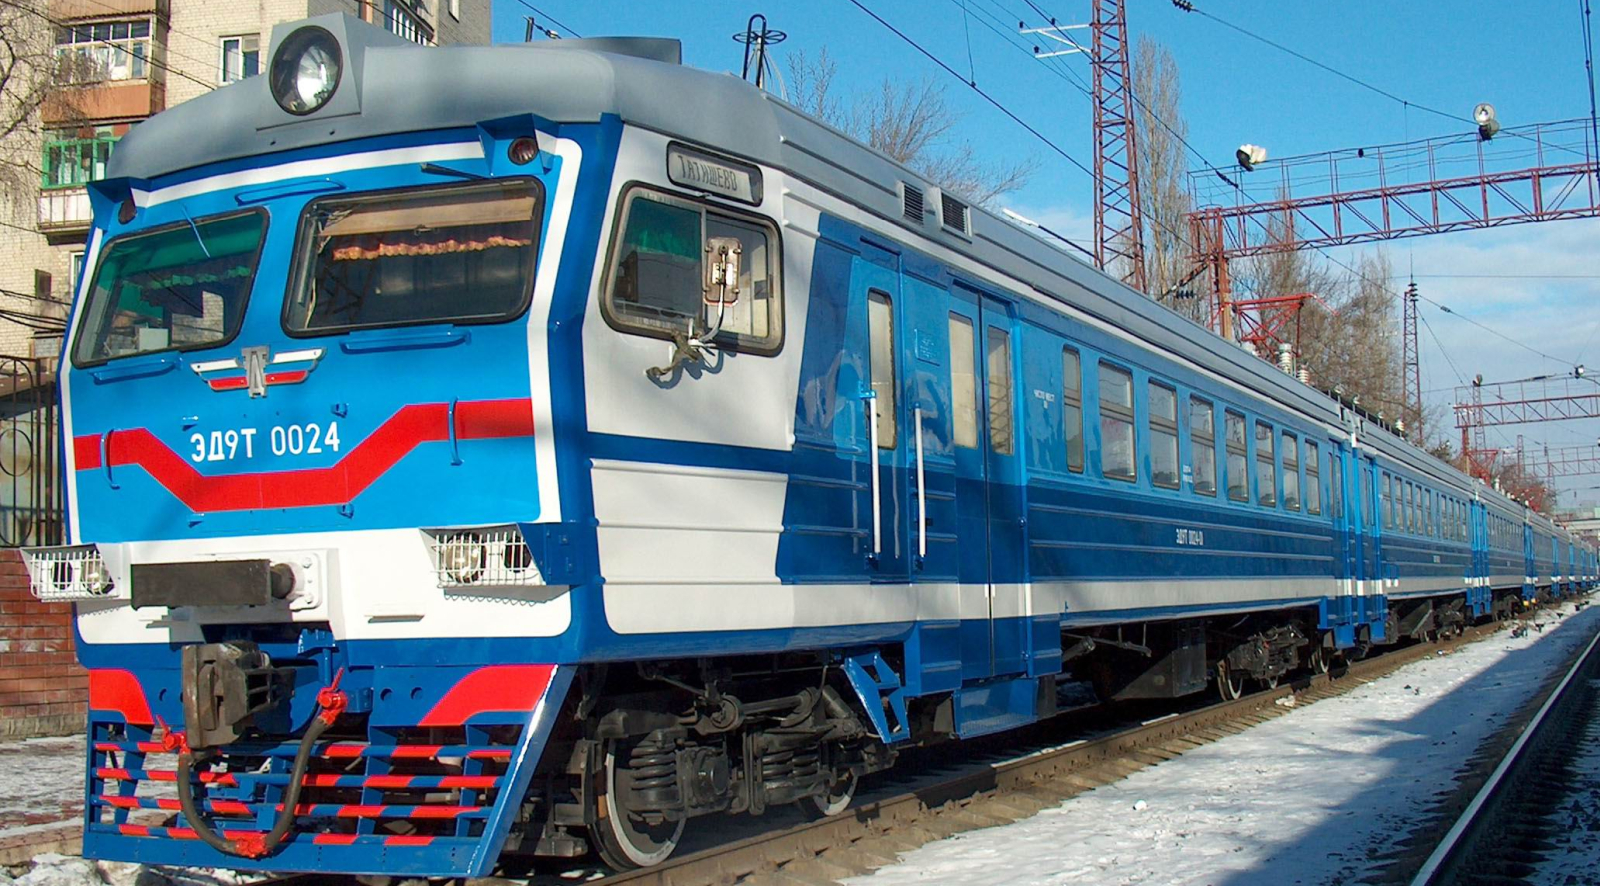 ЭД9-0024 in December 2005 in Moscow